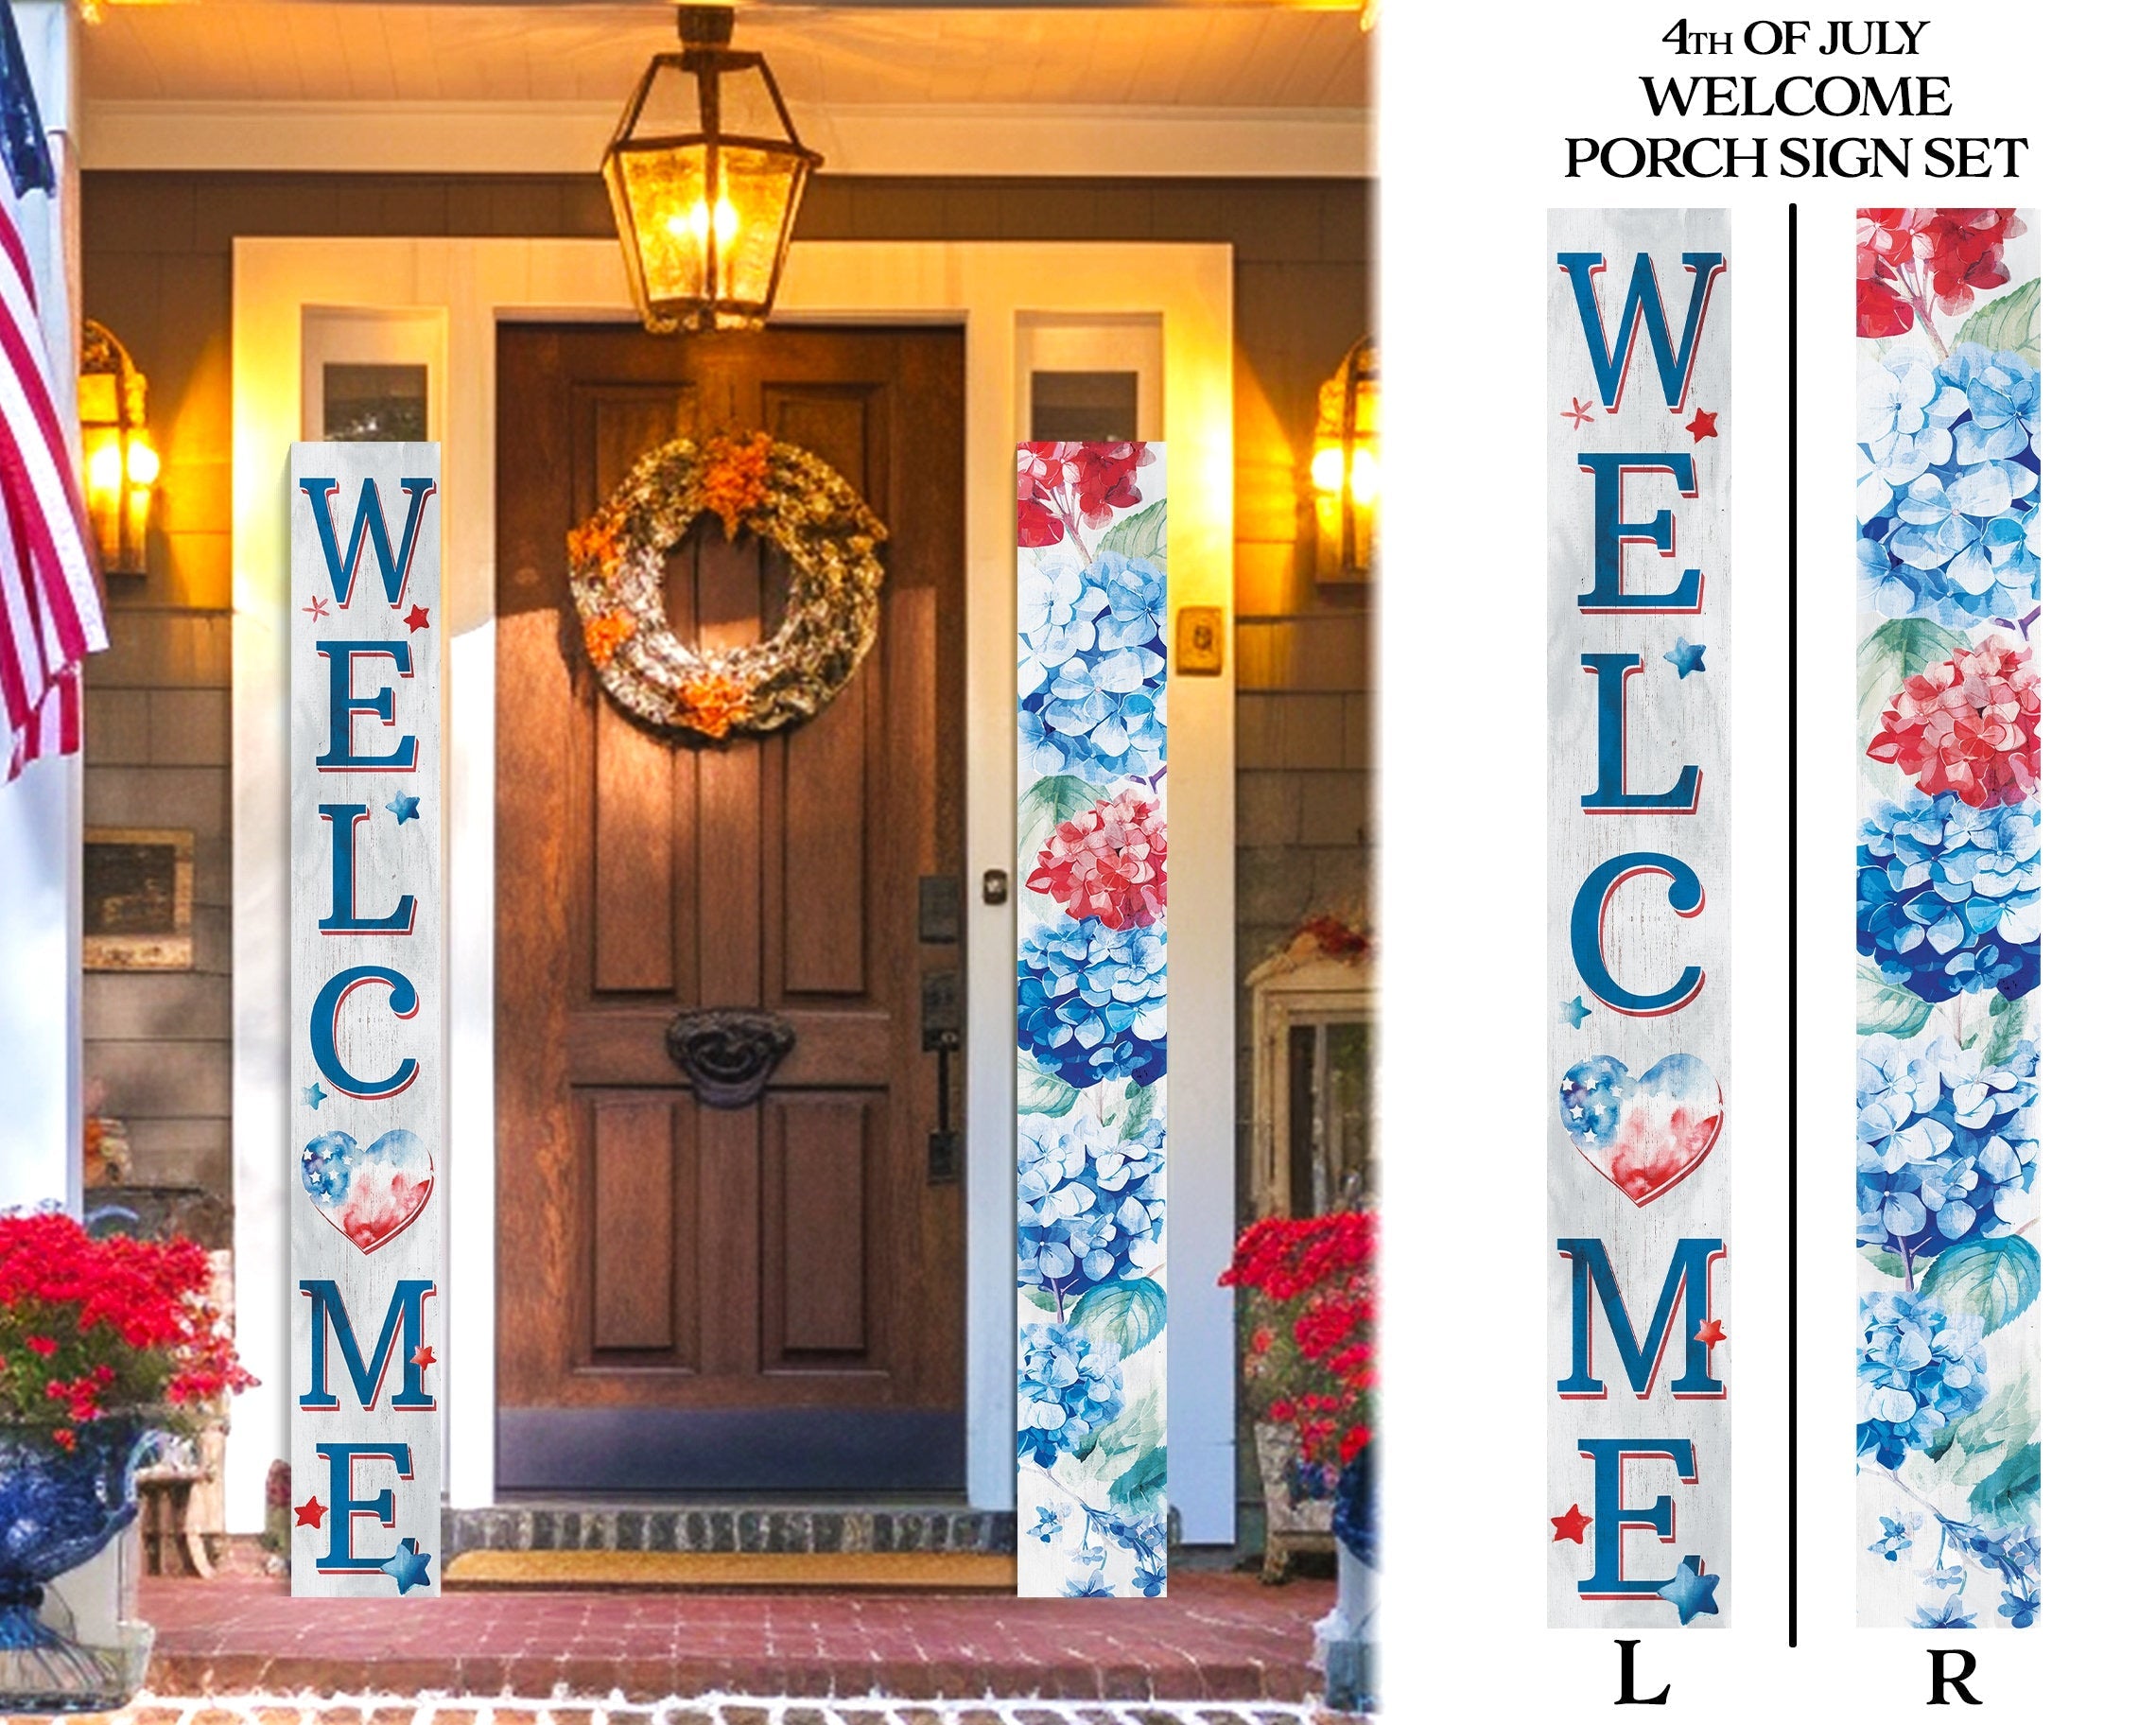 72in-4th-of-July-Floral-Sign-|-Patriotic-Wooden-Porch-Decor-|-Vertical-Floral-Designs-|-Independence-Day-Outdoor-Decor-